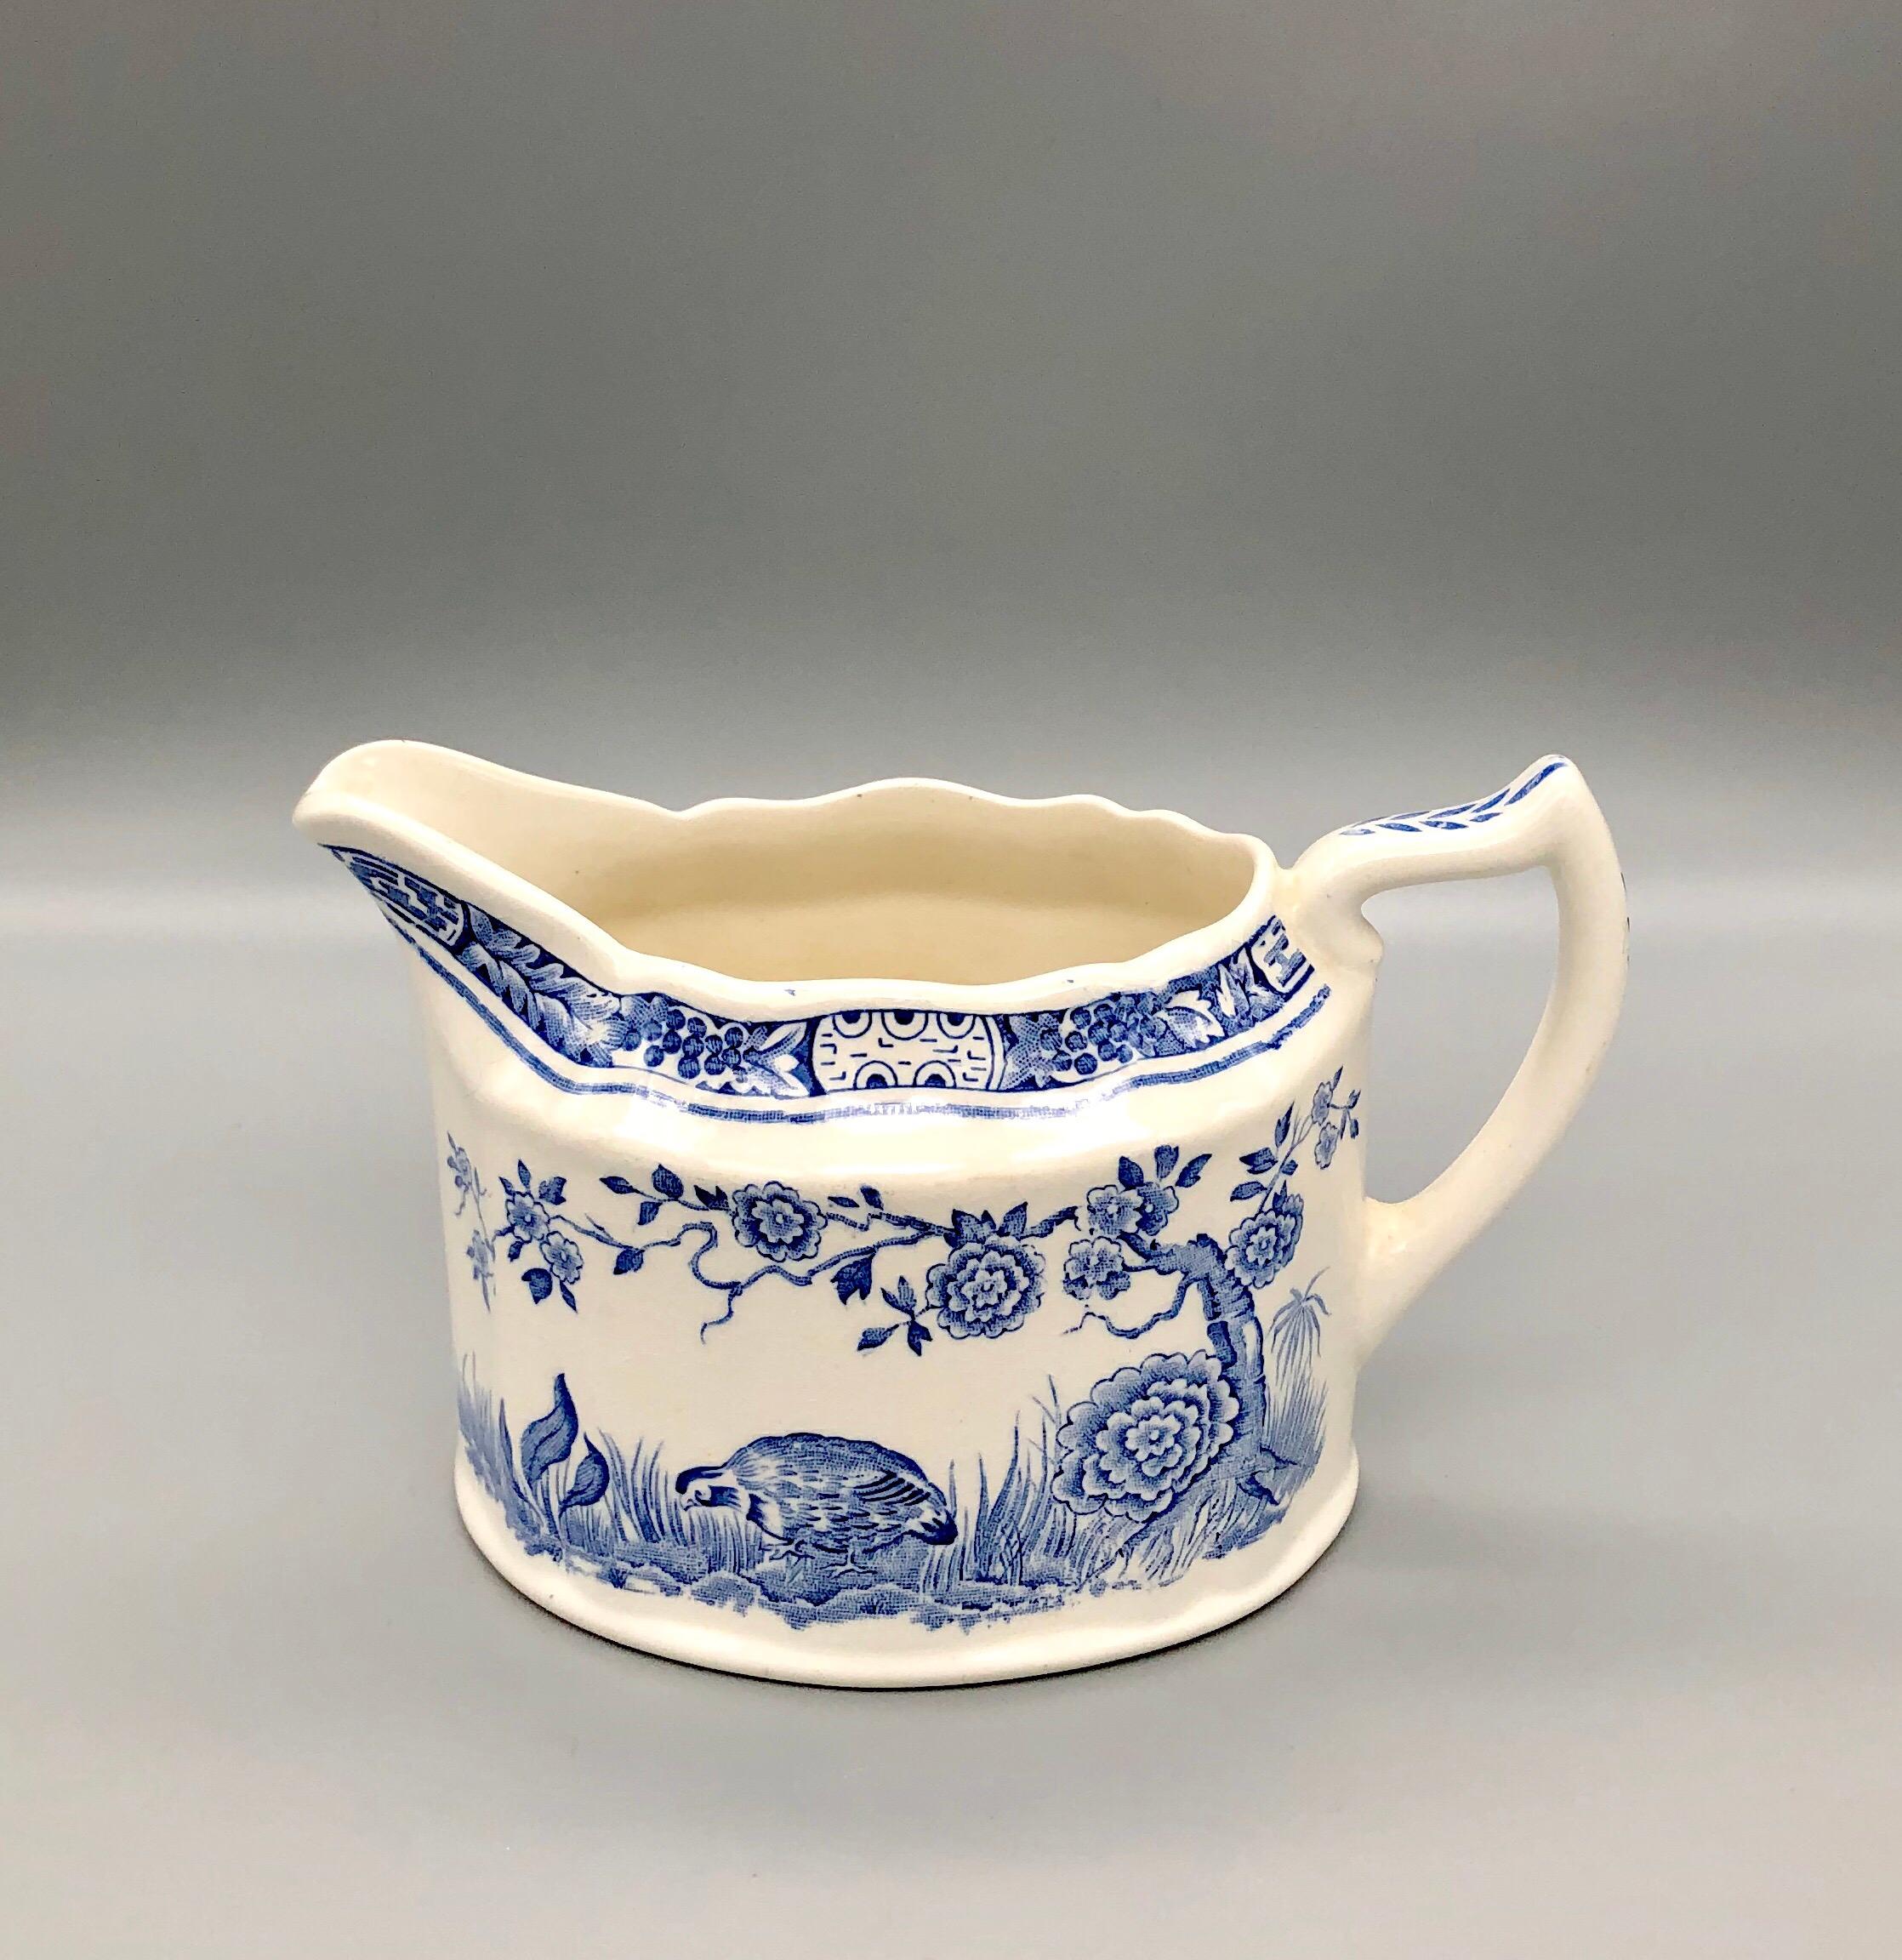 Blue and White Furnivals Quail 1913 Pottery Teapot, Creamer and Sugar Bowl Set For Sale 4